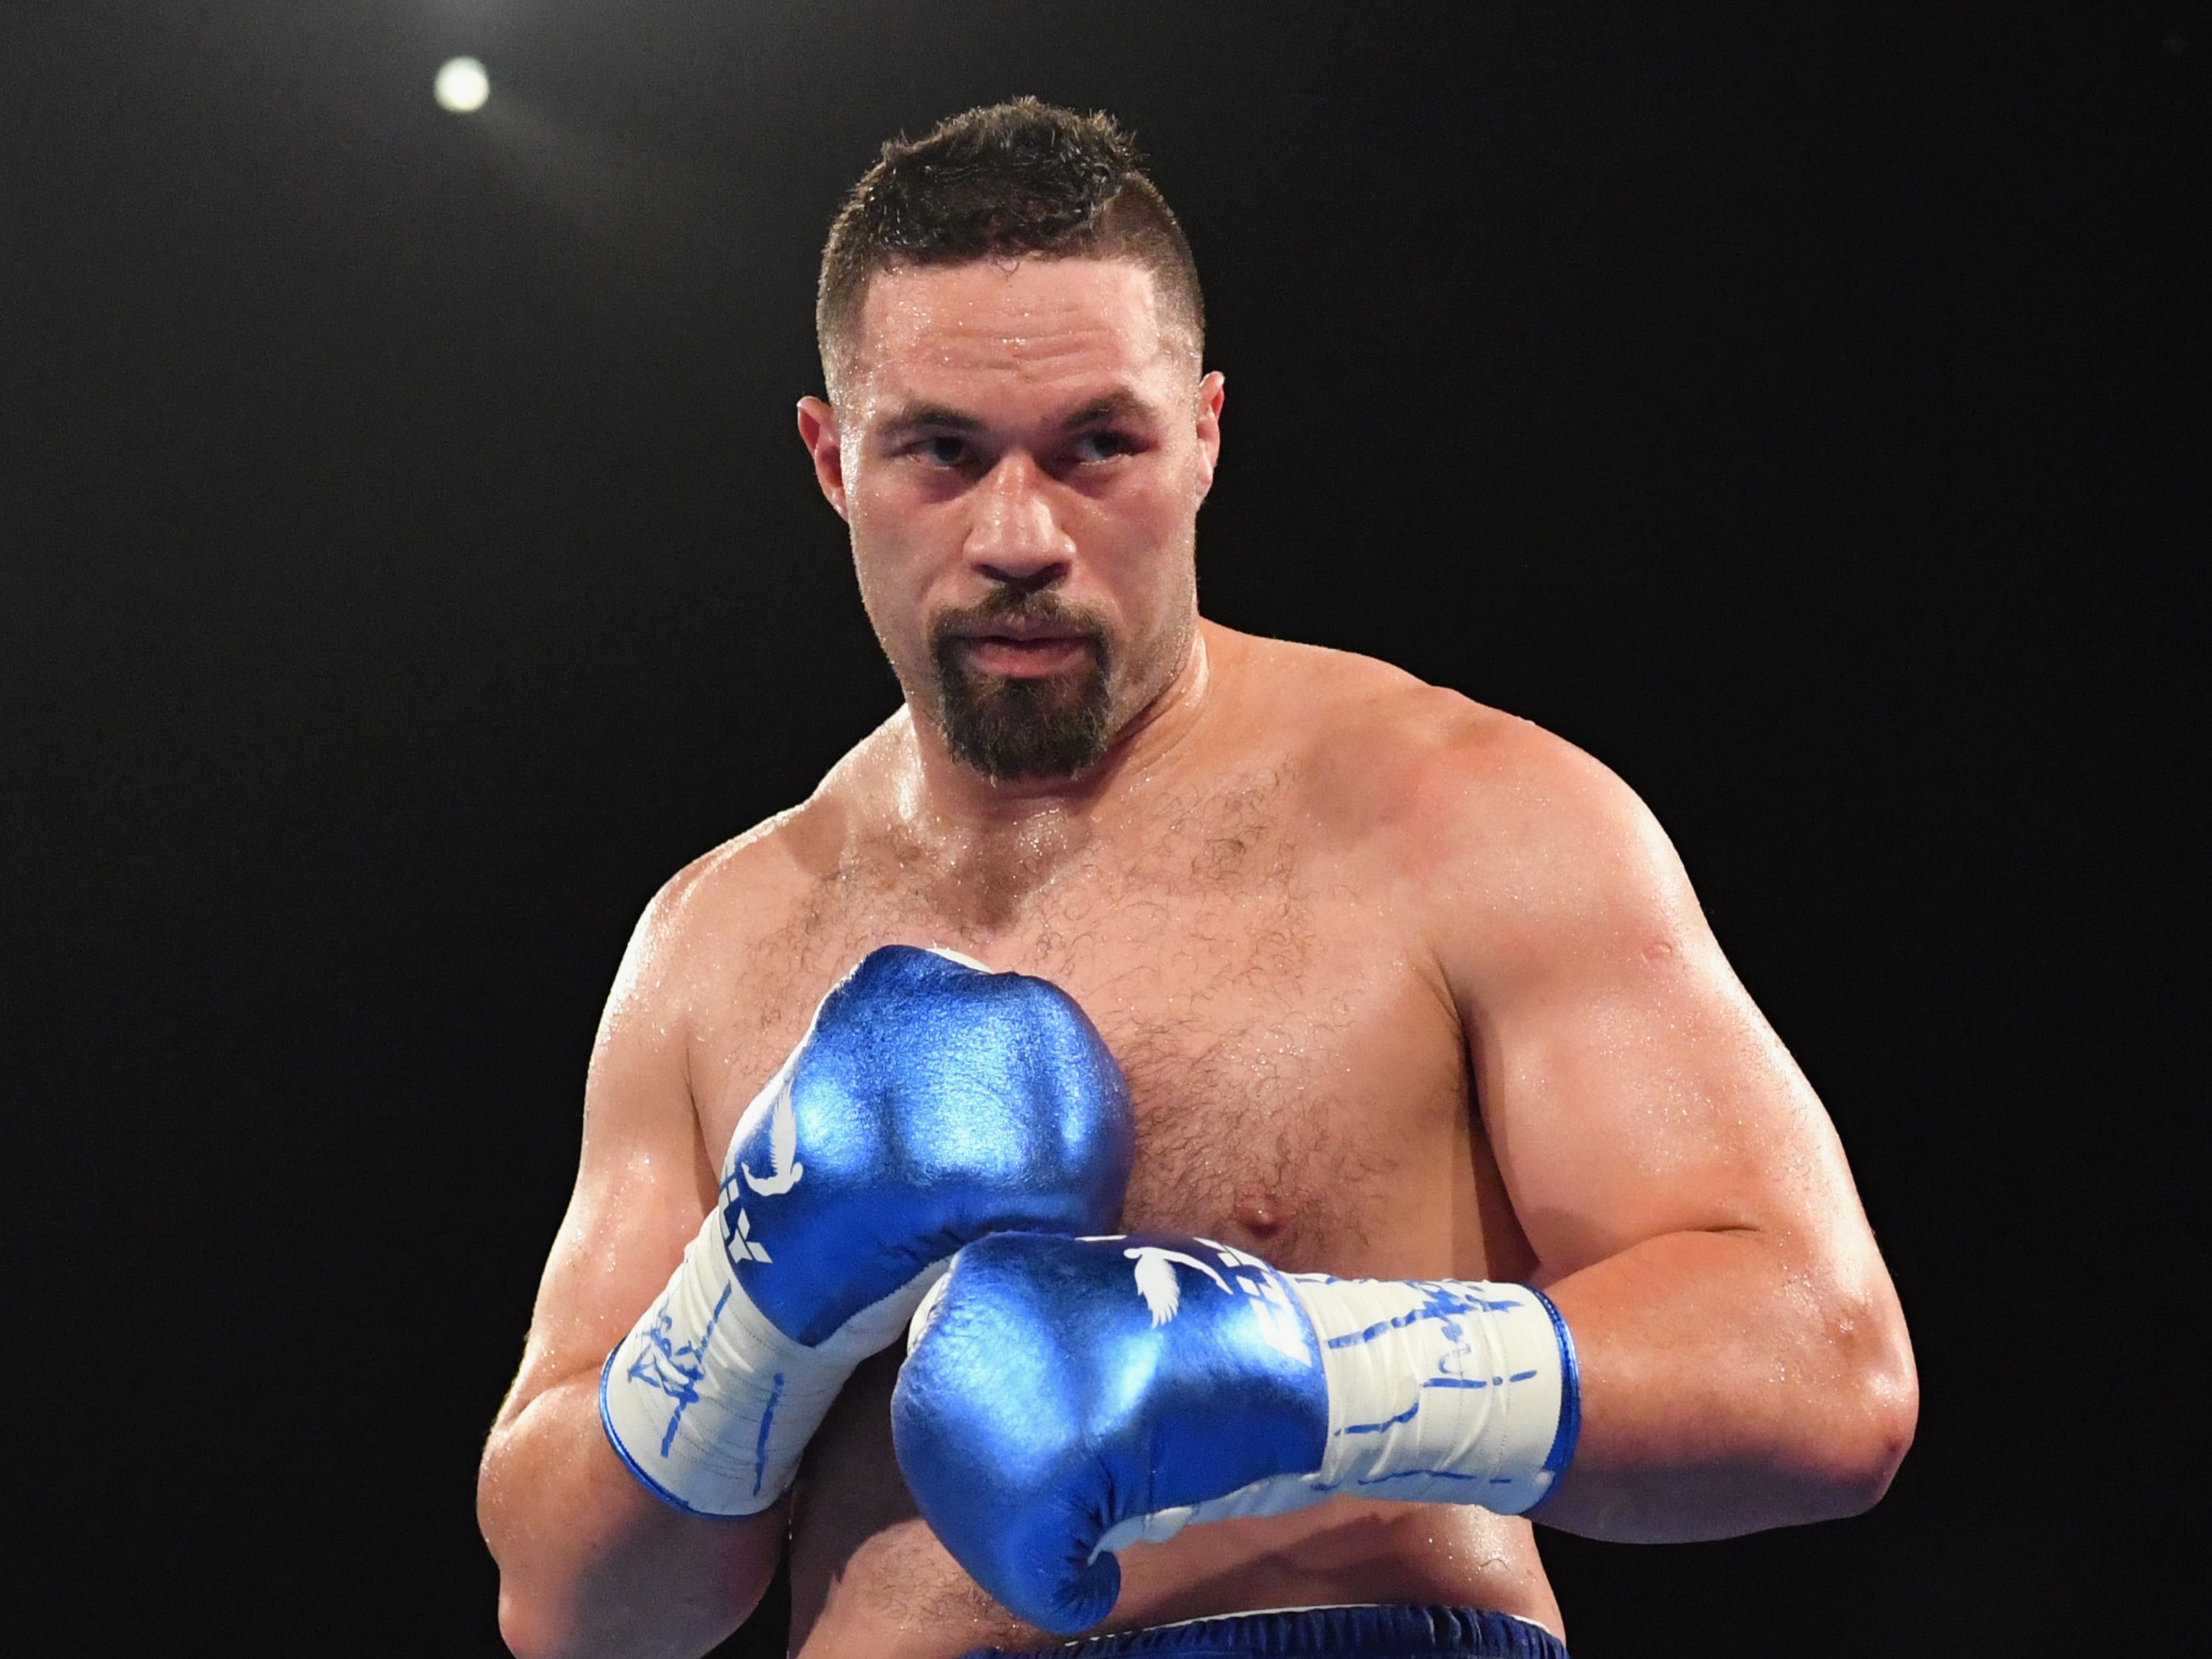 Joseph Parker on Joe Joyce fight We should leave the cr**-talking to Fury and Wilder The Independent